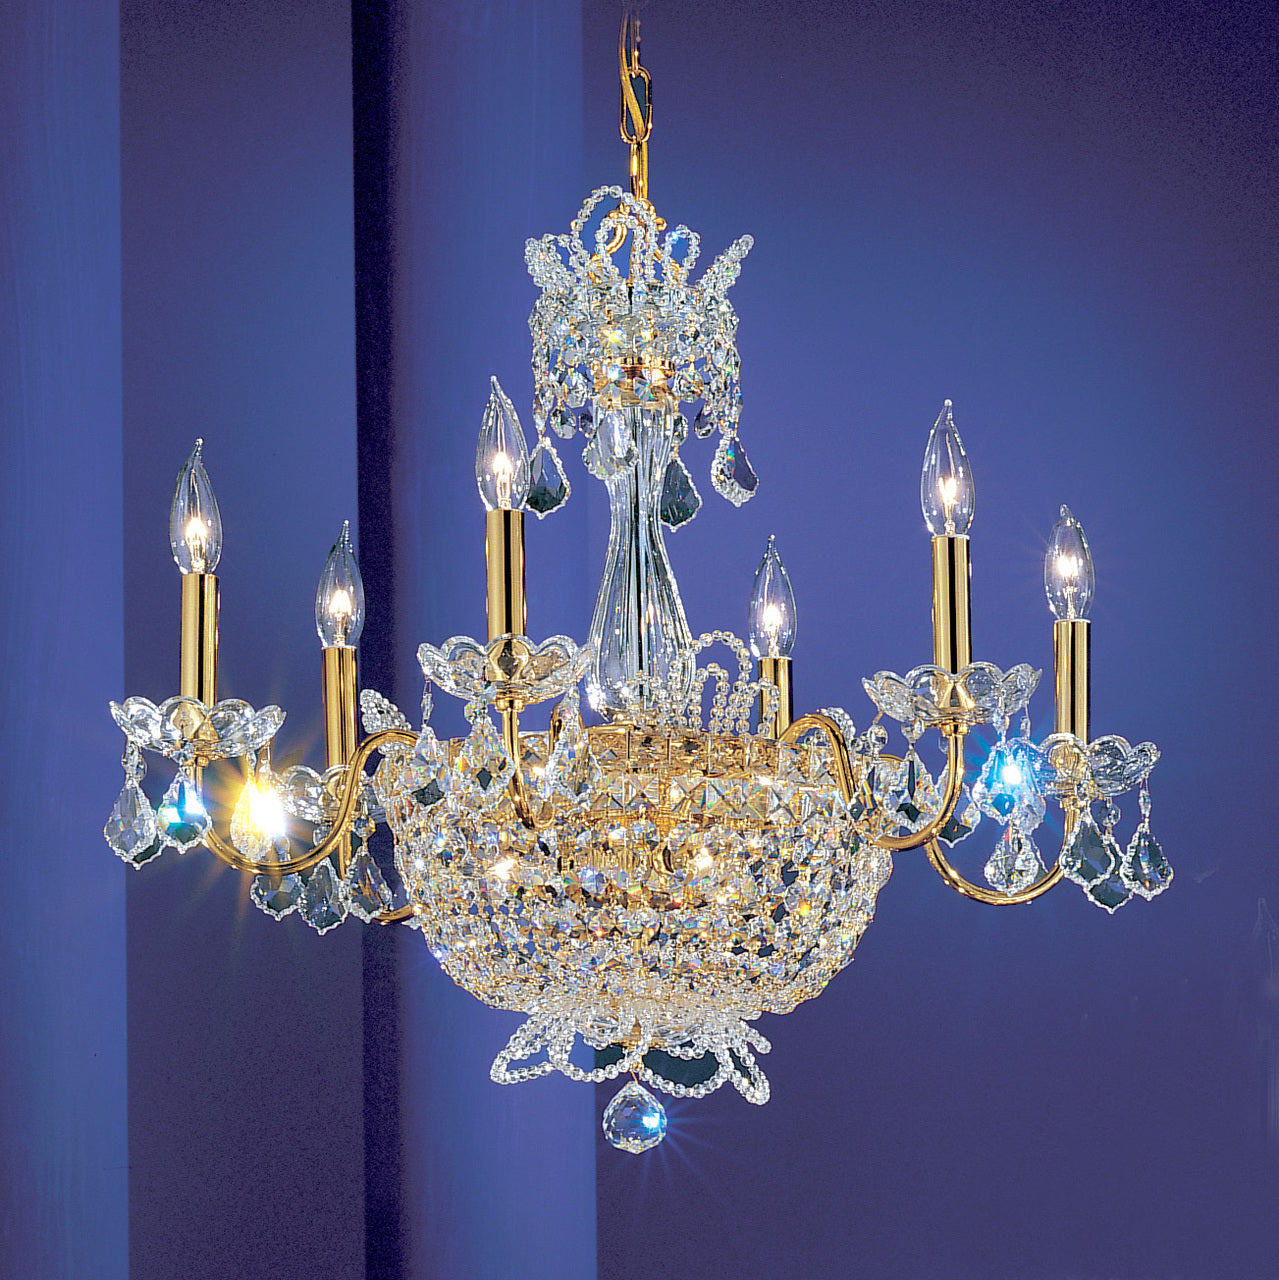 Classic Lighting 69786 GP CP Crown Jewels Crystal Chandelier in Gold